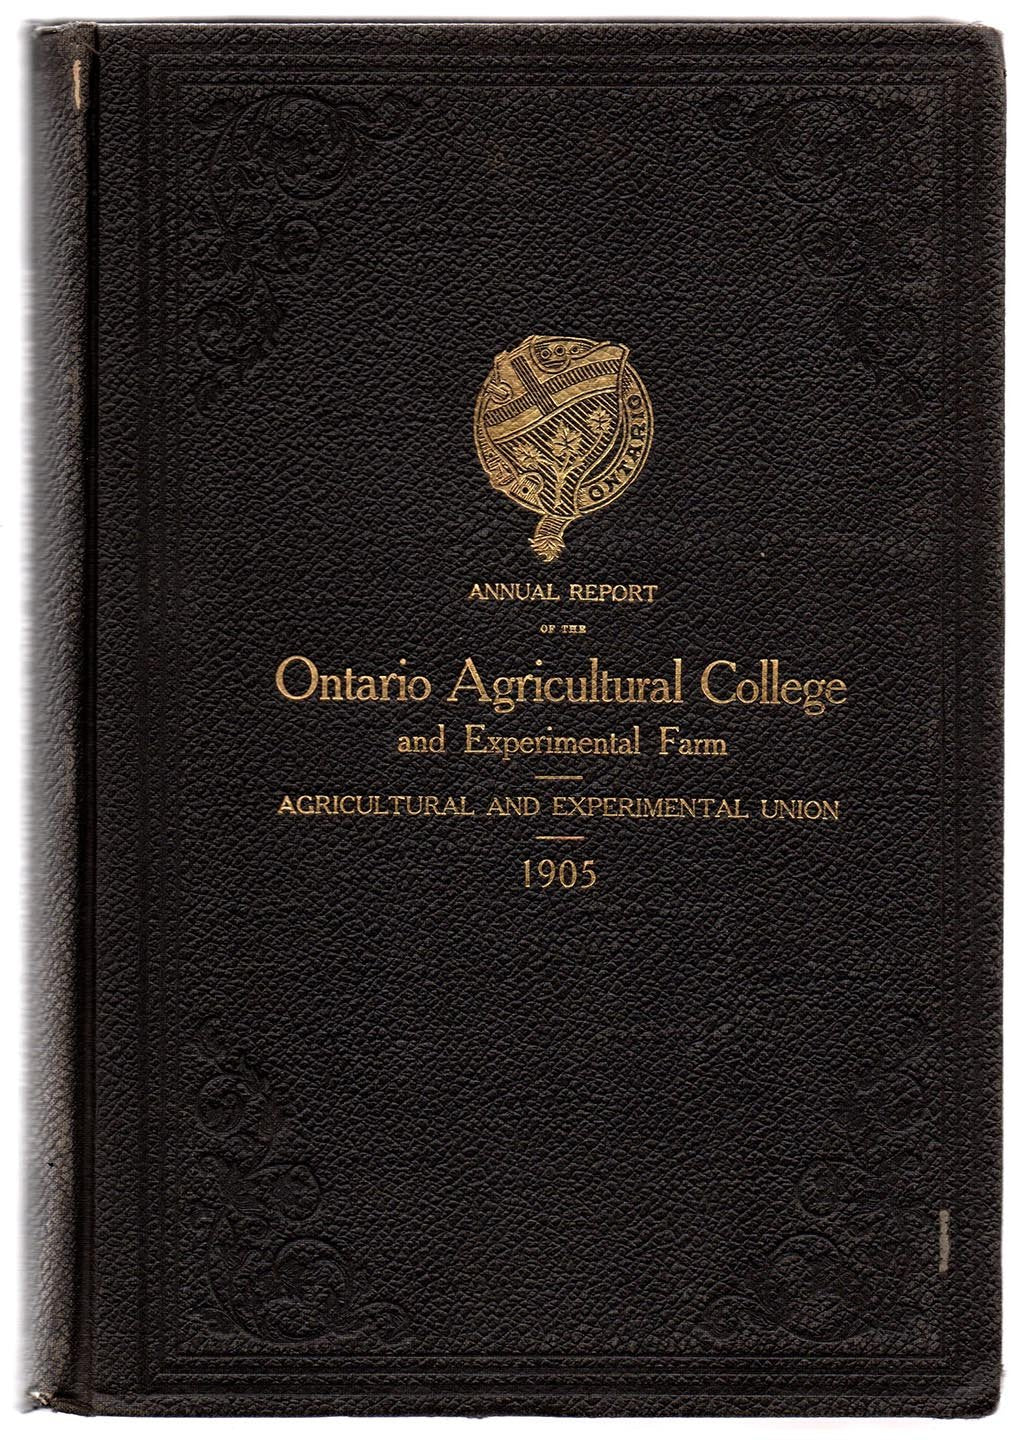 Thirty-first Annual Report of the Ontario Agricultural College and Experimental Farm 1905; Twenty-seventh Annual Report of the Agricultural and Experimental Union 1905